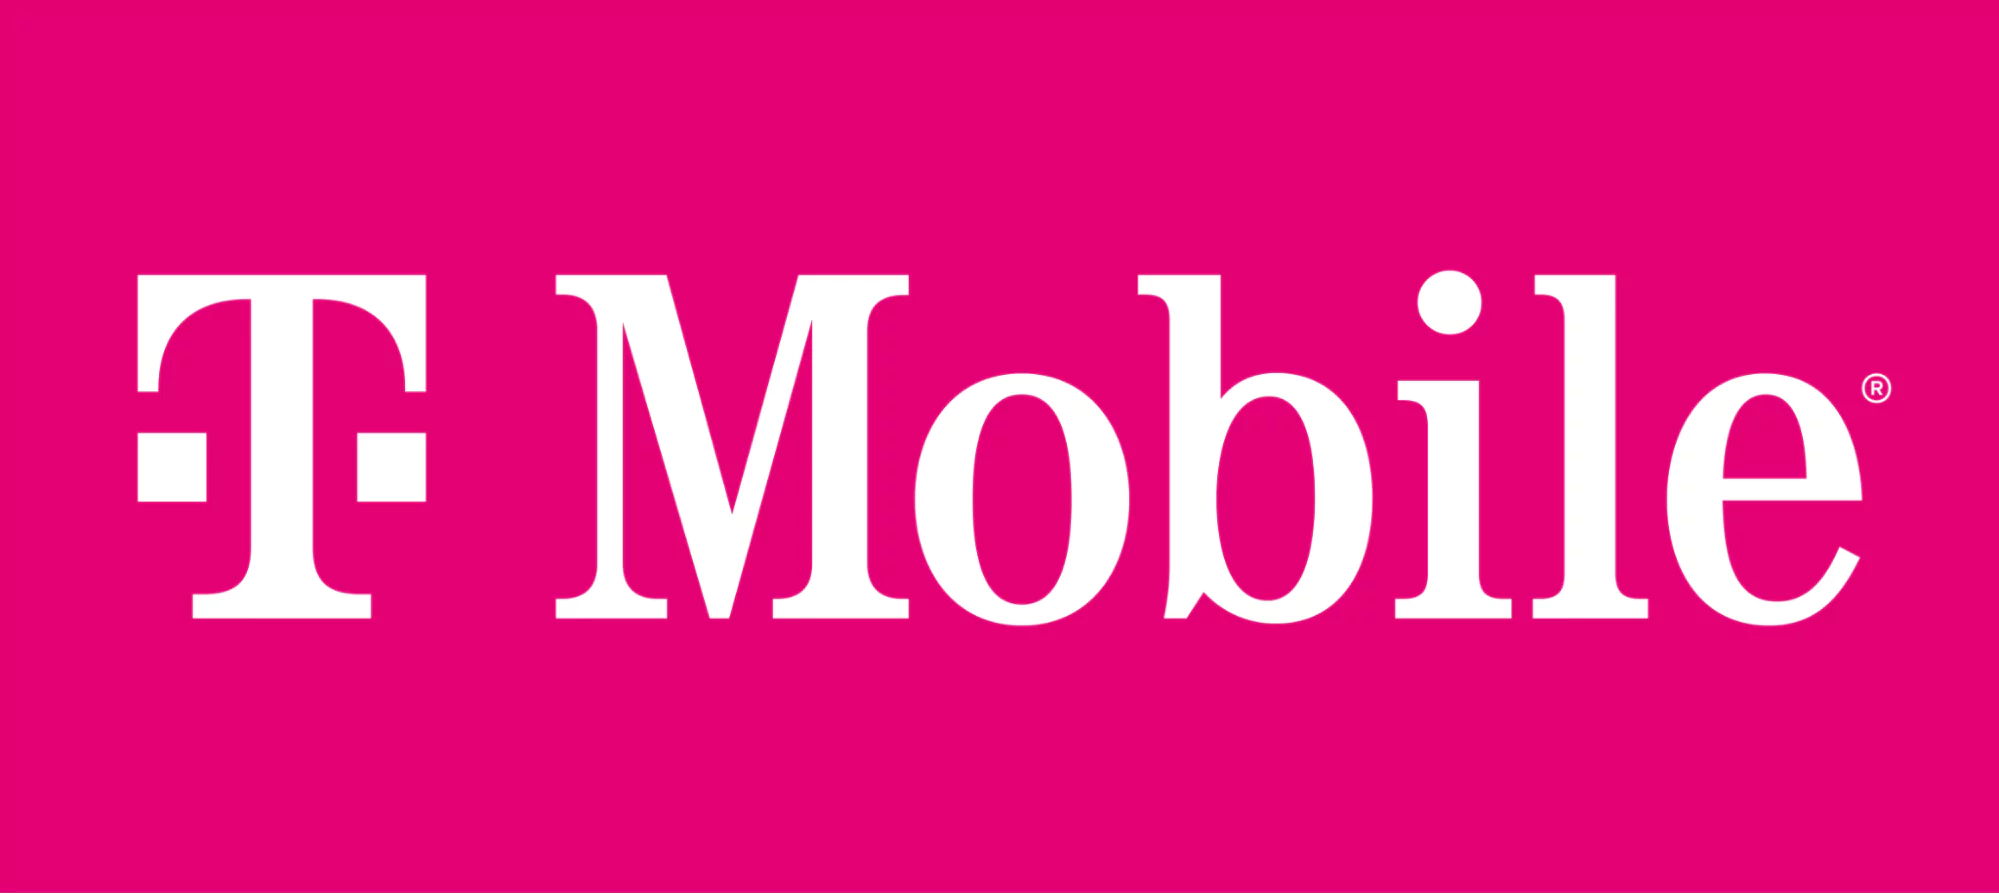 Magenta T-Mobile logo with the white text